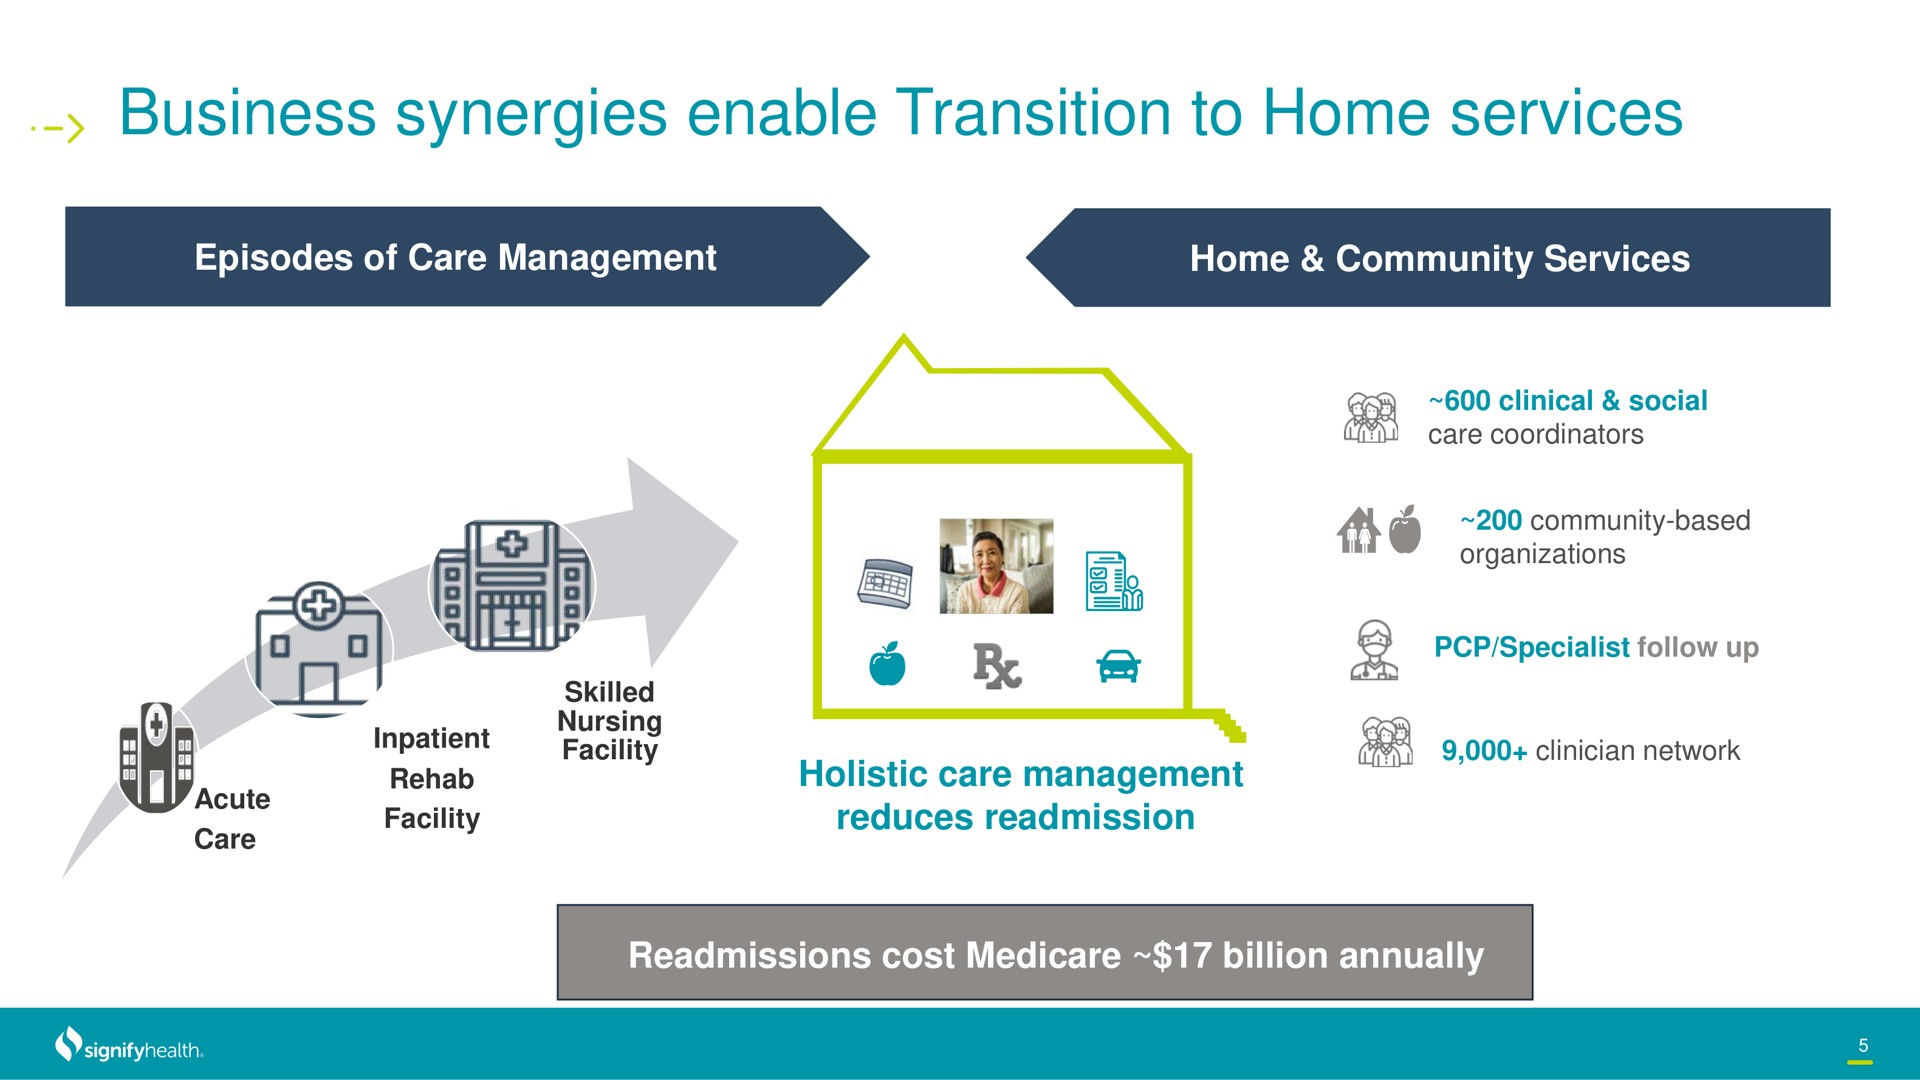 business synergies enable transition to home services | Signify Health